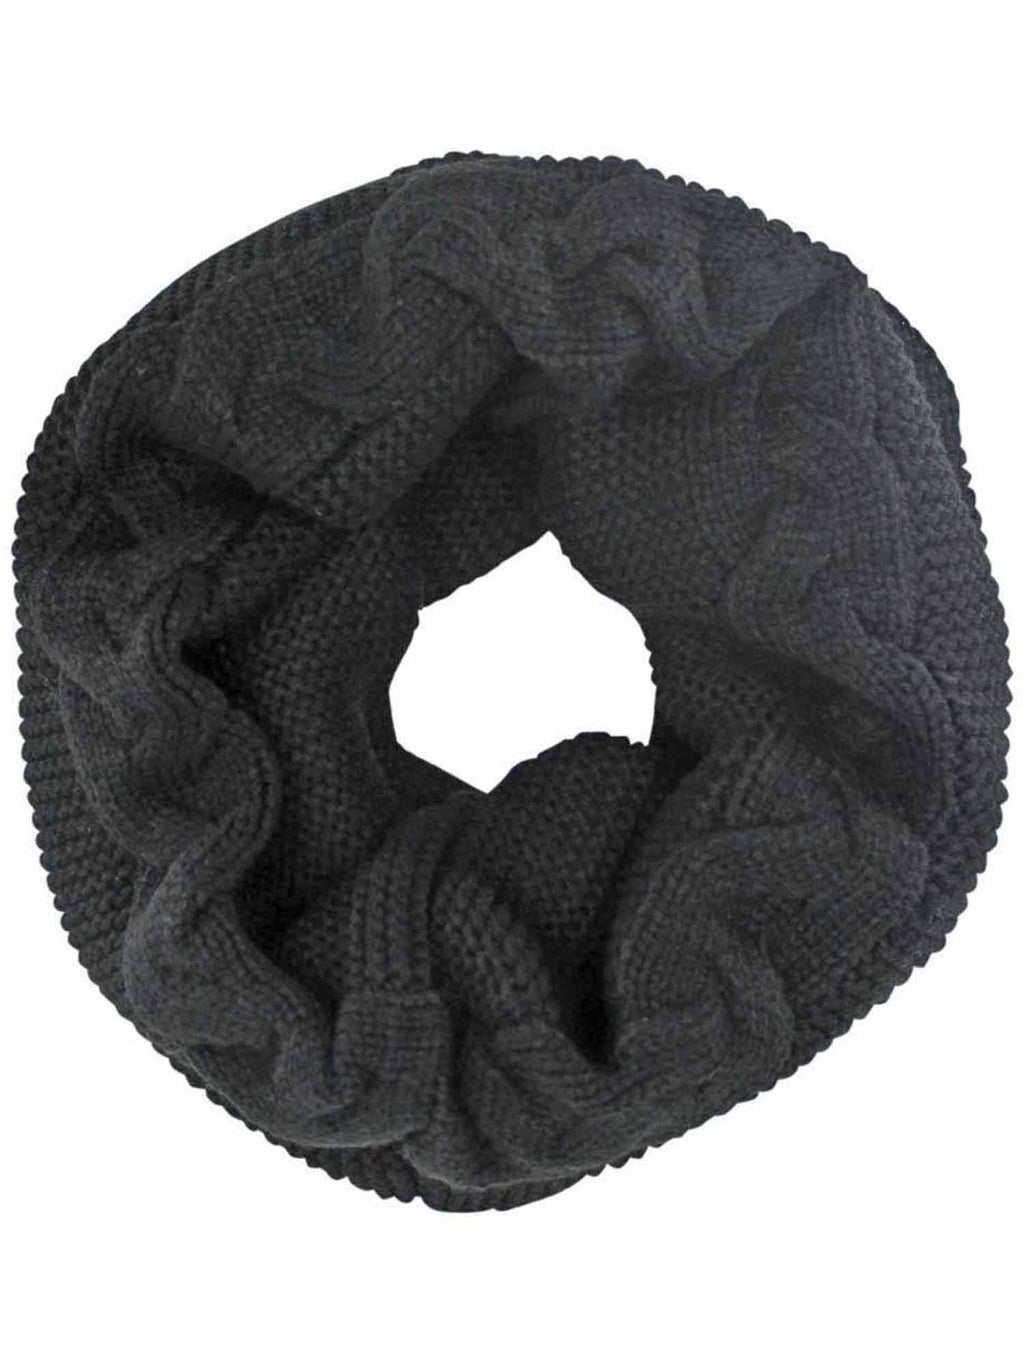 Chunky Cable Knit Winter Infinity Scarf